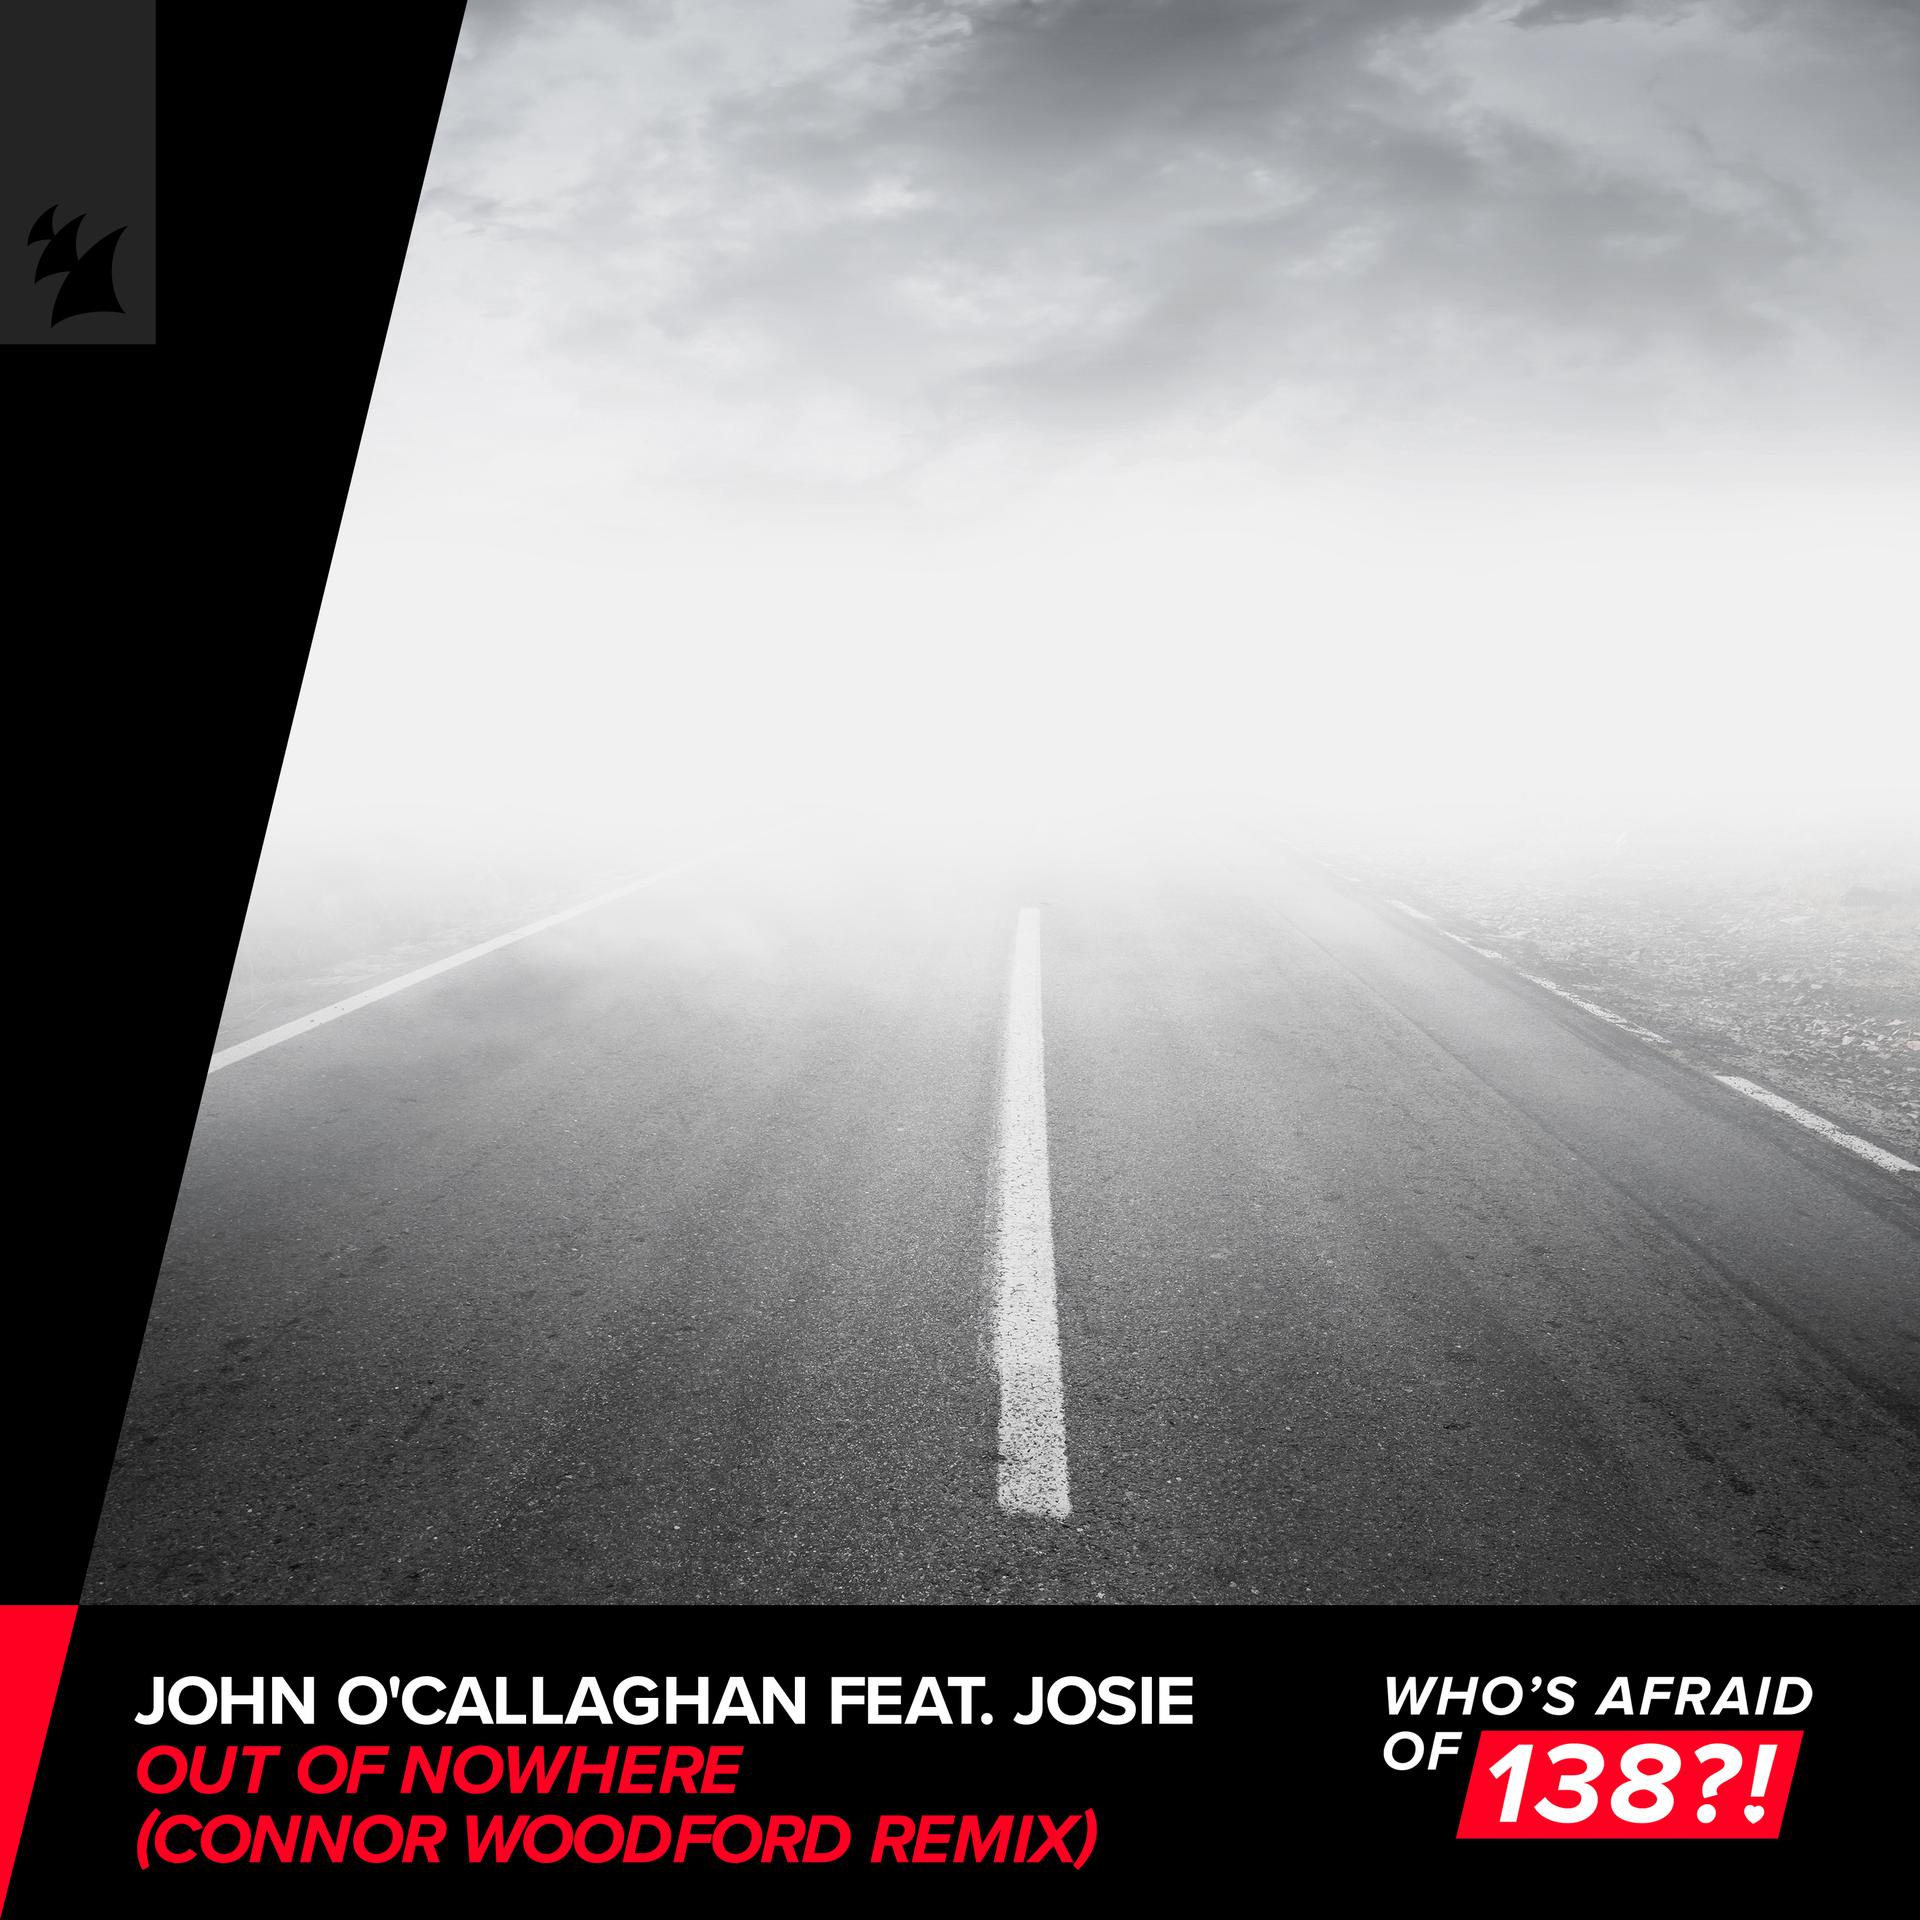 John O'Callaghan feat. Josie presents Out Of Nowhere (Connor Woodford Remix) on Who's Afraid Of 138?!